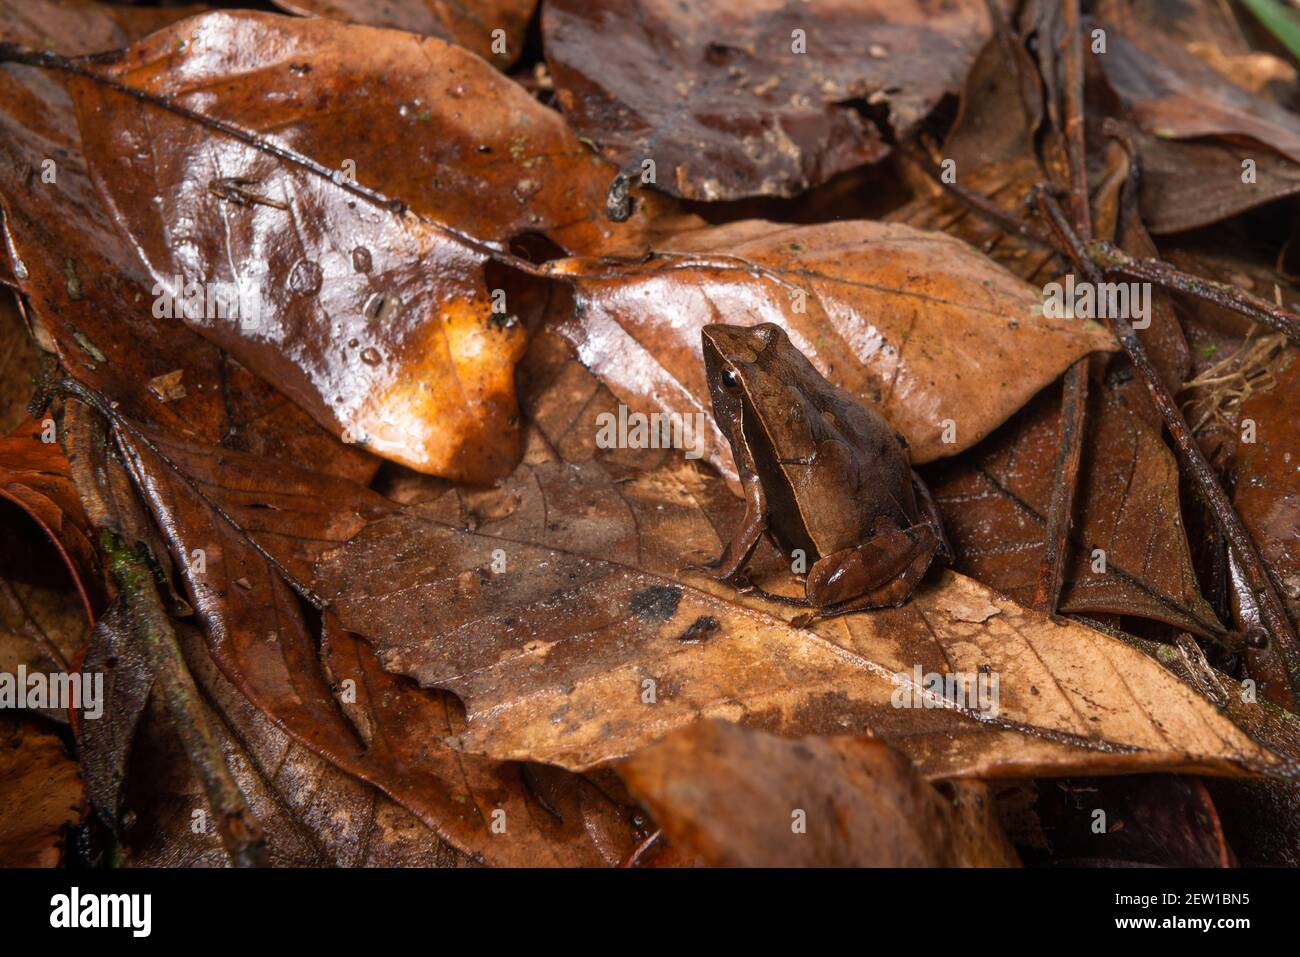 A Physalaemus olfersii camouflaged in the leaf litter of the Atlantic Rainforest of SE Brazil Stock Photo